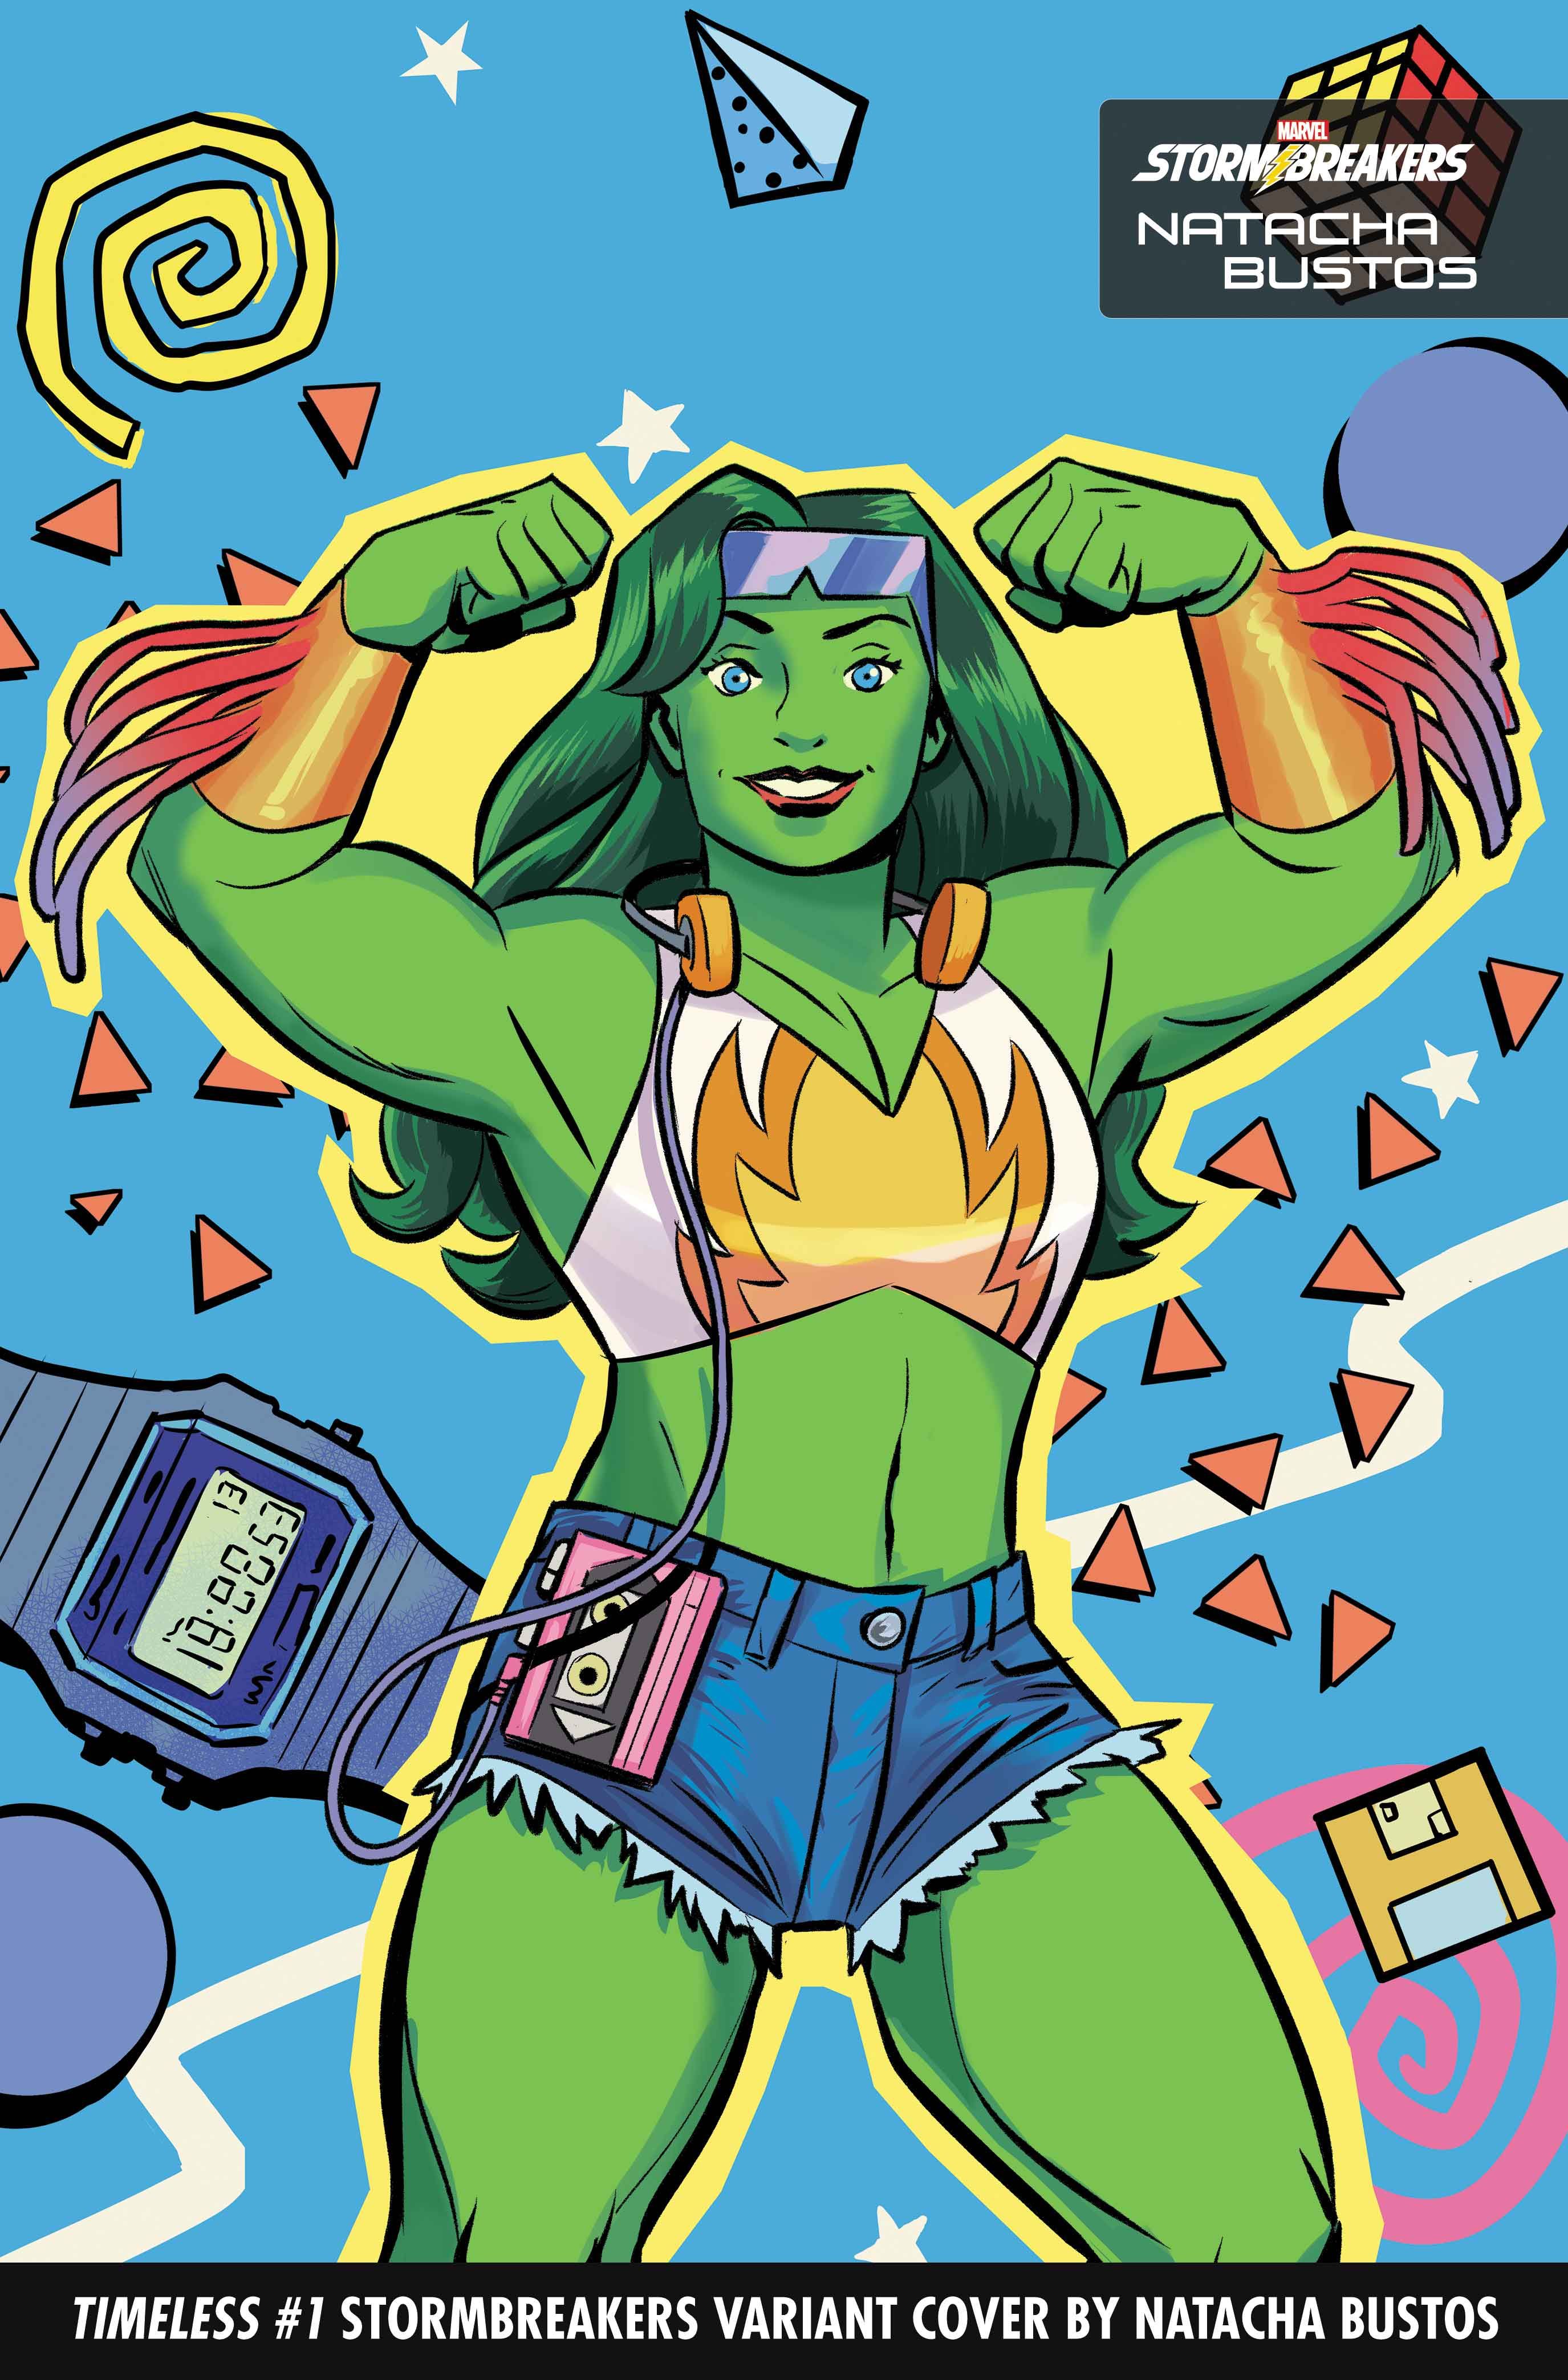 She-Hulk on the cover of Timeless 1 Stormbreakers variant by Natacha Bustos